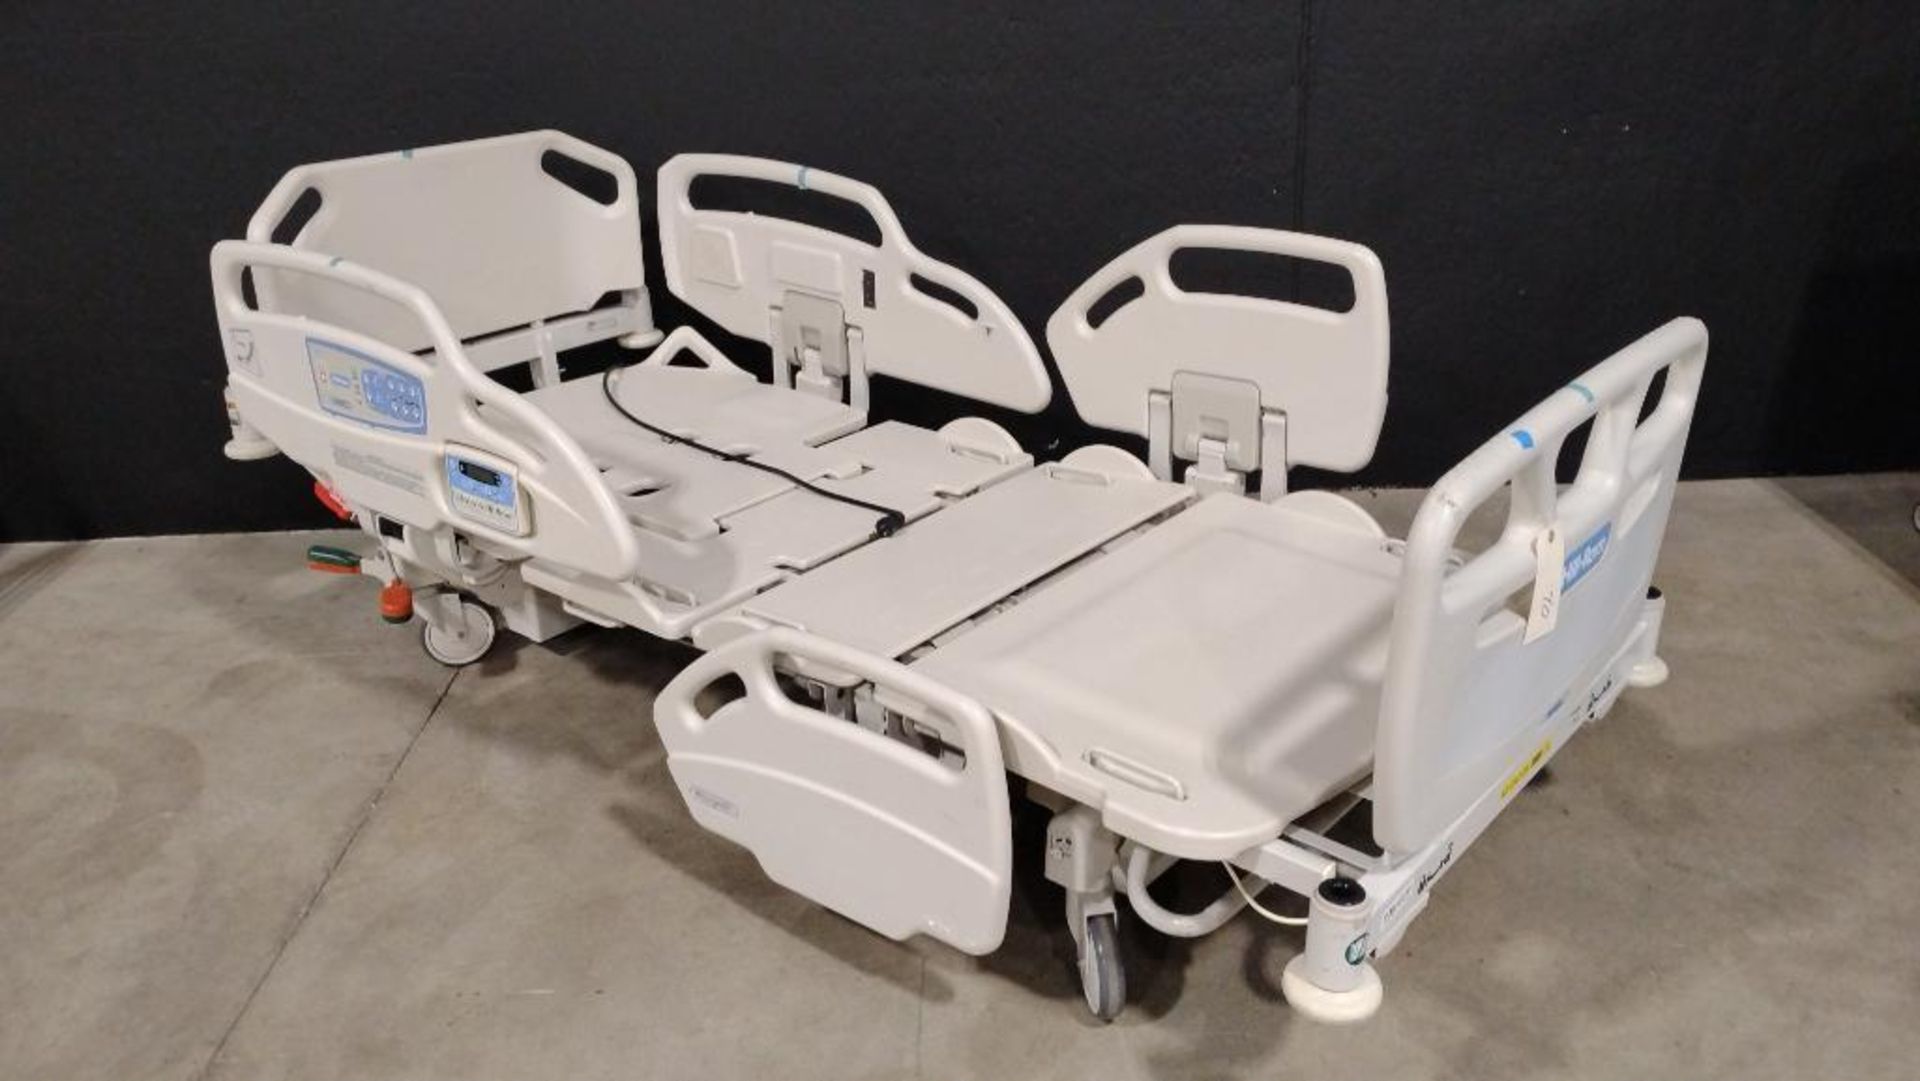 HILL-ROM CARE ASSIST ES 1170G HOSPITAL BED - Image 4 of 4